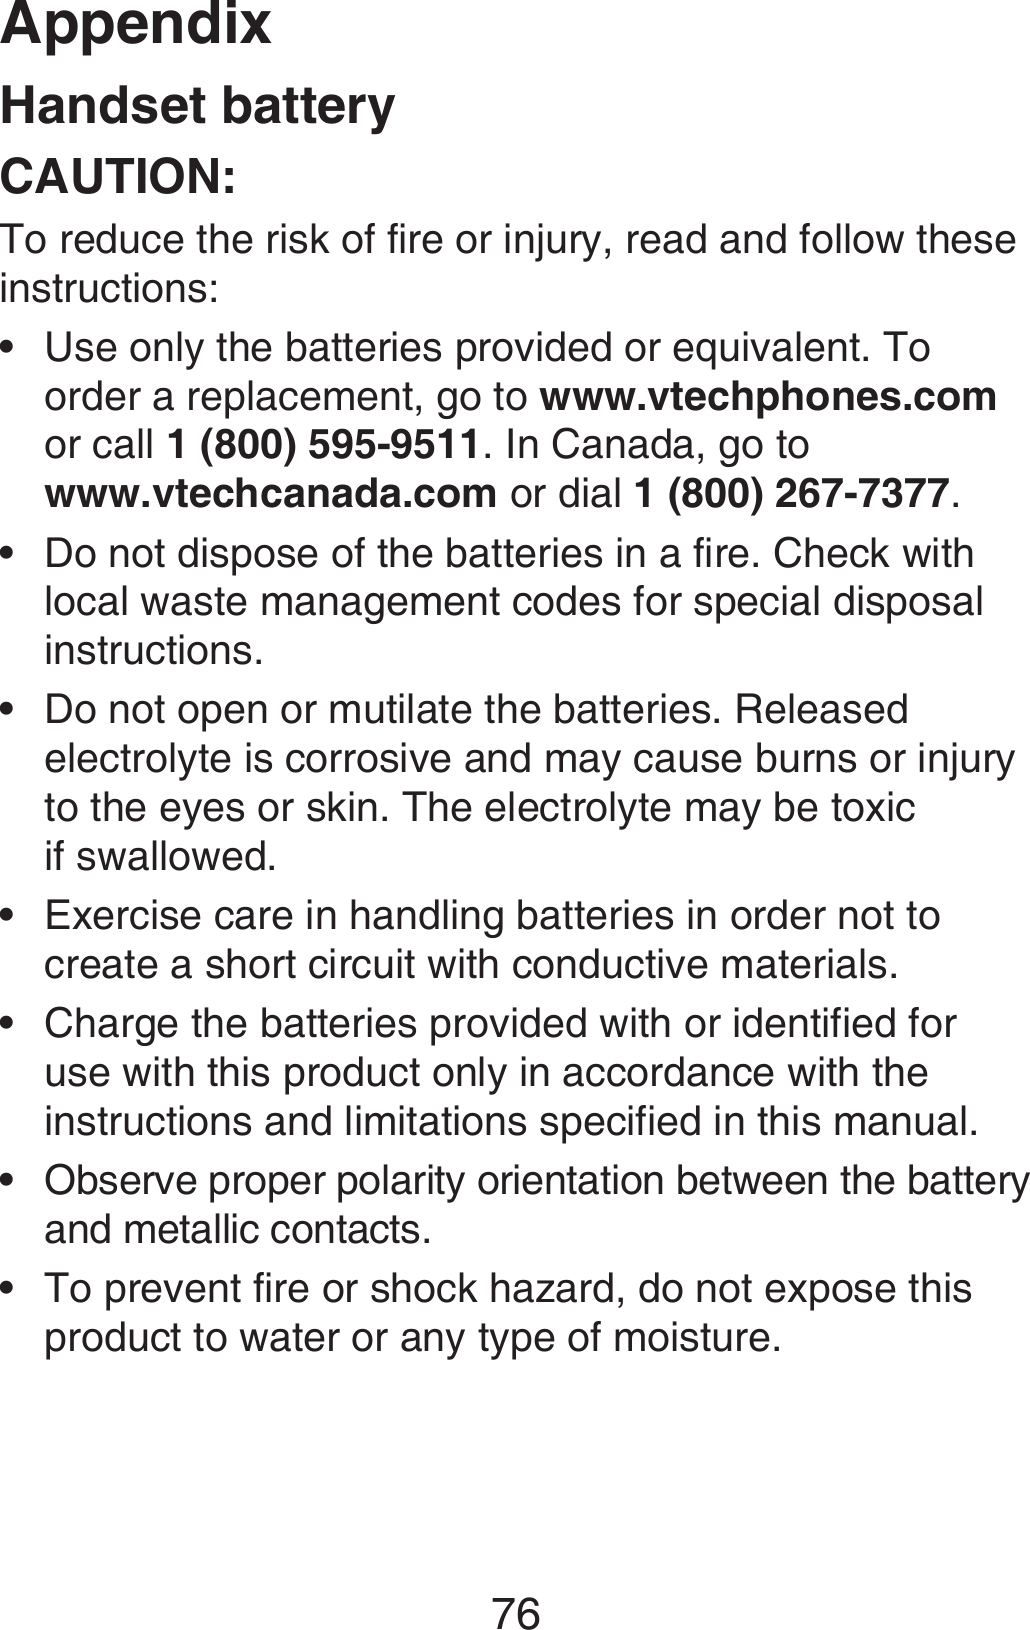 Appendix76Handset batteryCAUTION:To reduce the risk of fire or injury, read and follow these instructions:Use only the batteries provided or equivalent. To order a replacement, go to www.vtechphones.com or call 1 (800) 595-9511. In Canada, go to  www.vtechcanada.com or dial 1 (800) 267-7377.Do not dispose of the batteries in a fire. Check with local waste management codes for special disposal instructions.Do not open or mutilate the batteries. Released electrolyte is corrosive and may cause burns or injury to the eyes or skin. The electrolyte may be toxic  if swallowed.Exercise care in handling batteries in order not to create a short circuit with conductive materials.Charge the batteries provided with or identified for use with this product only in accordance with the instructions and limitations specified in this manual.Observe proper polarity orientation between the battery and metallic contacts.To prevent fire or shock hazard, do not expose this product to water or any type of moisture.•••••••